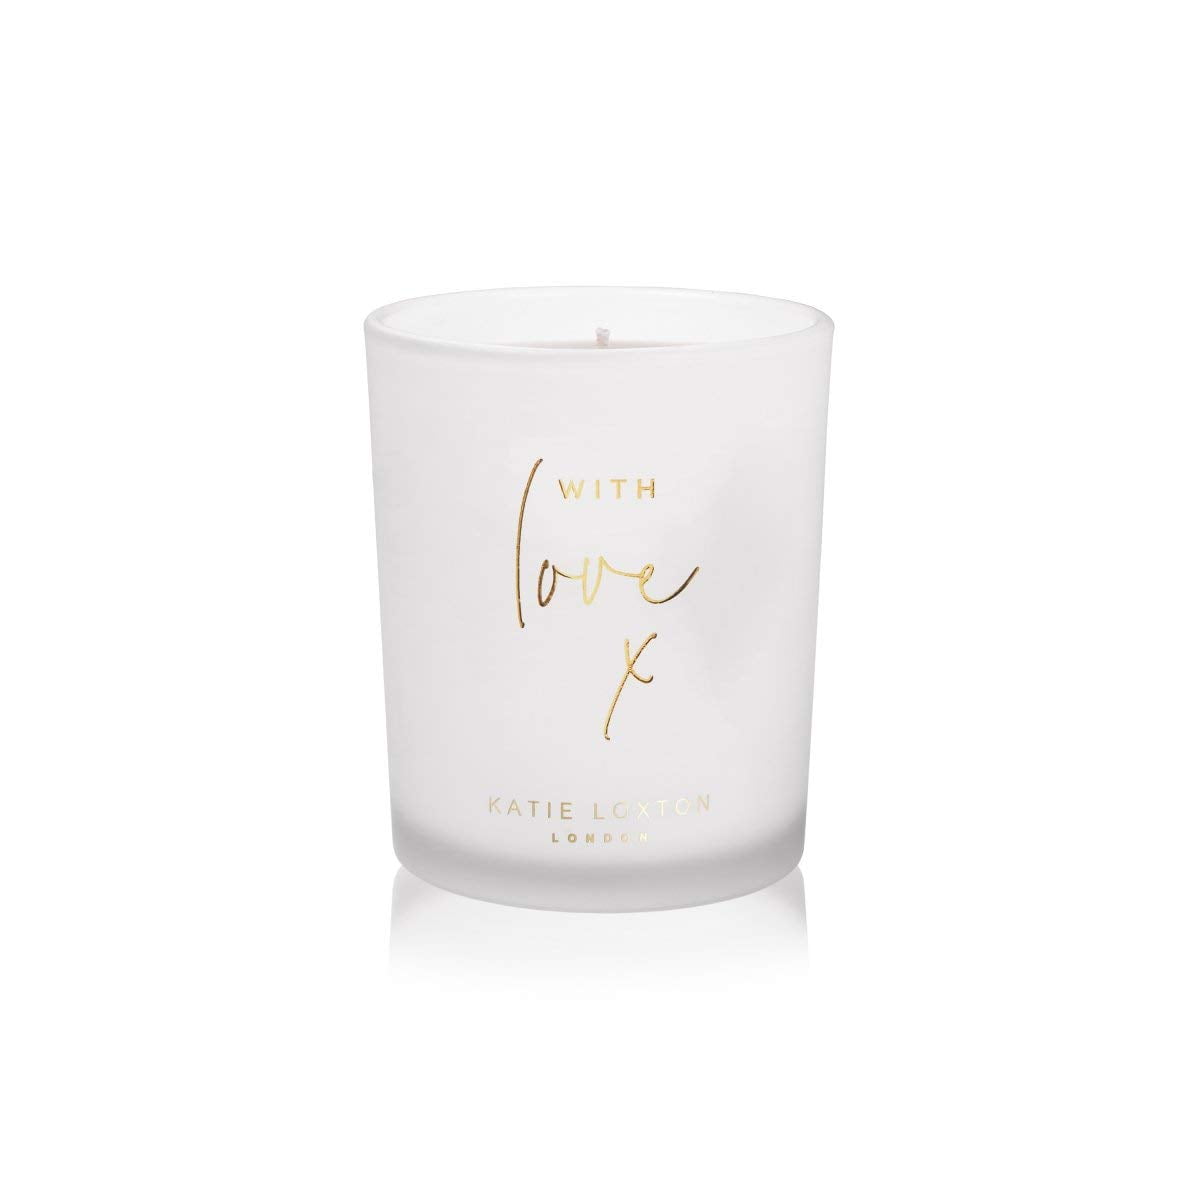 Pomegranate and Sweet Apple Katie Loxton Happy Birthday Gold Tone 5.6 Ounce Soy Wax Jar Candle